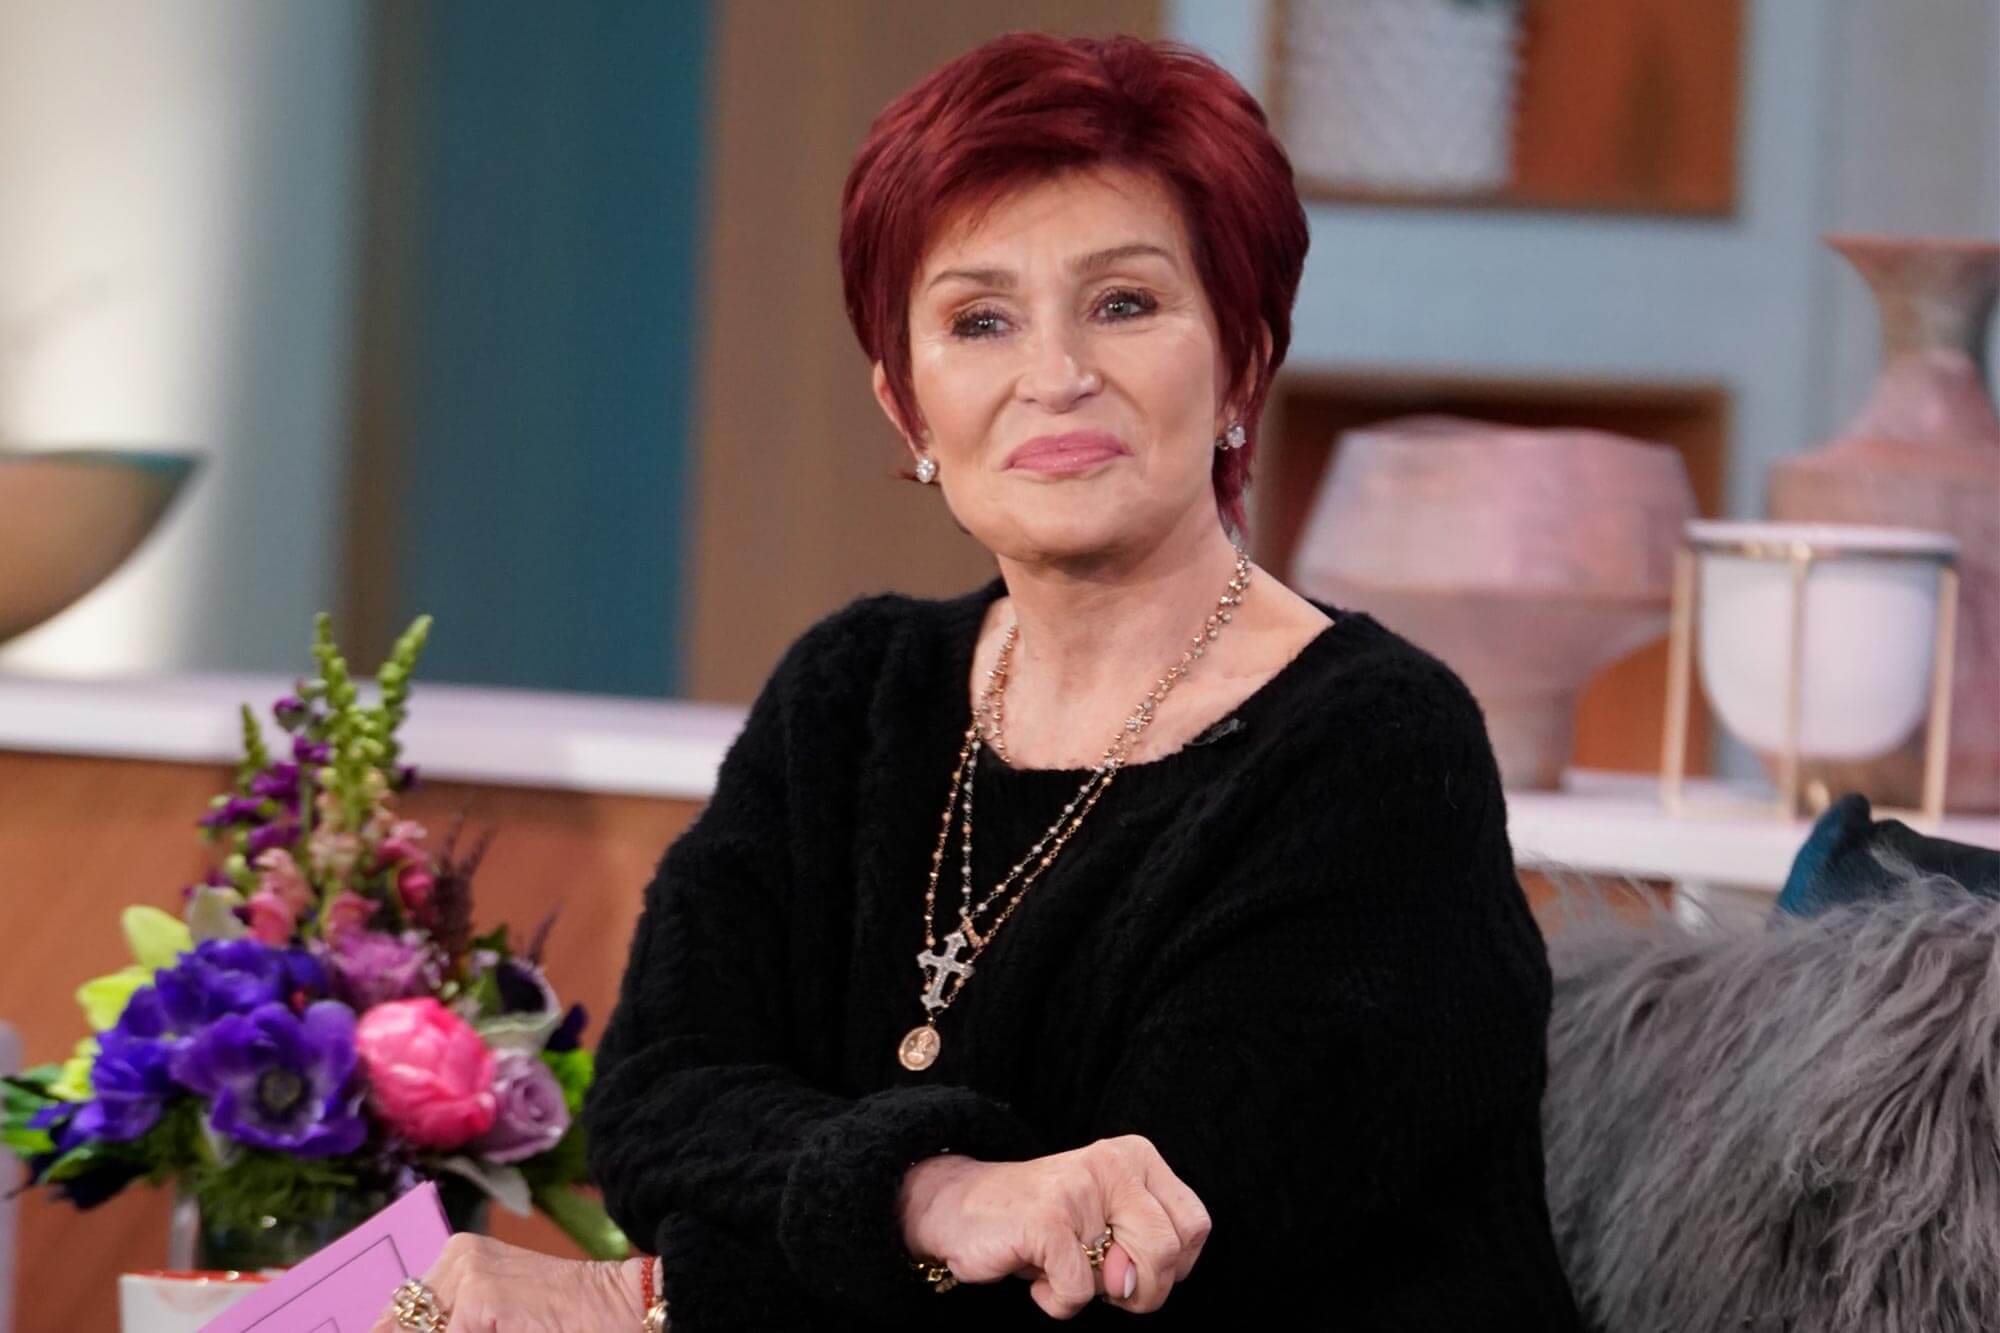 Sharon Osbourne Called Co-Hosts ‘Slanty Eyes,’ ‘Wonton’ and ‘P—y Licker’ As Show Extends Shut Down!